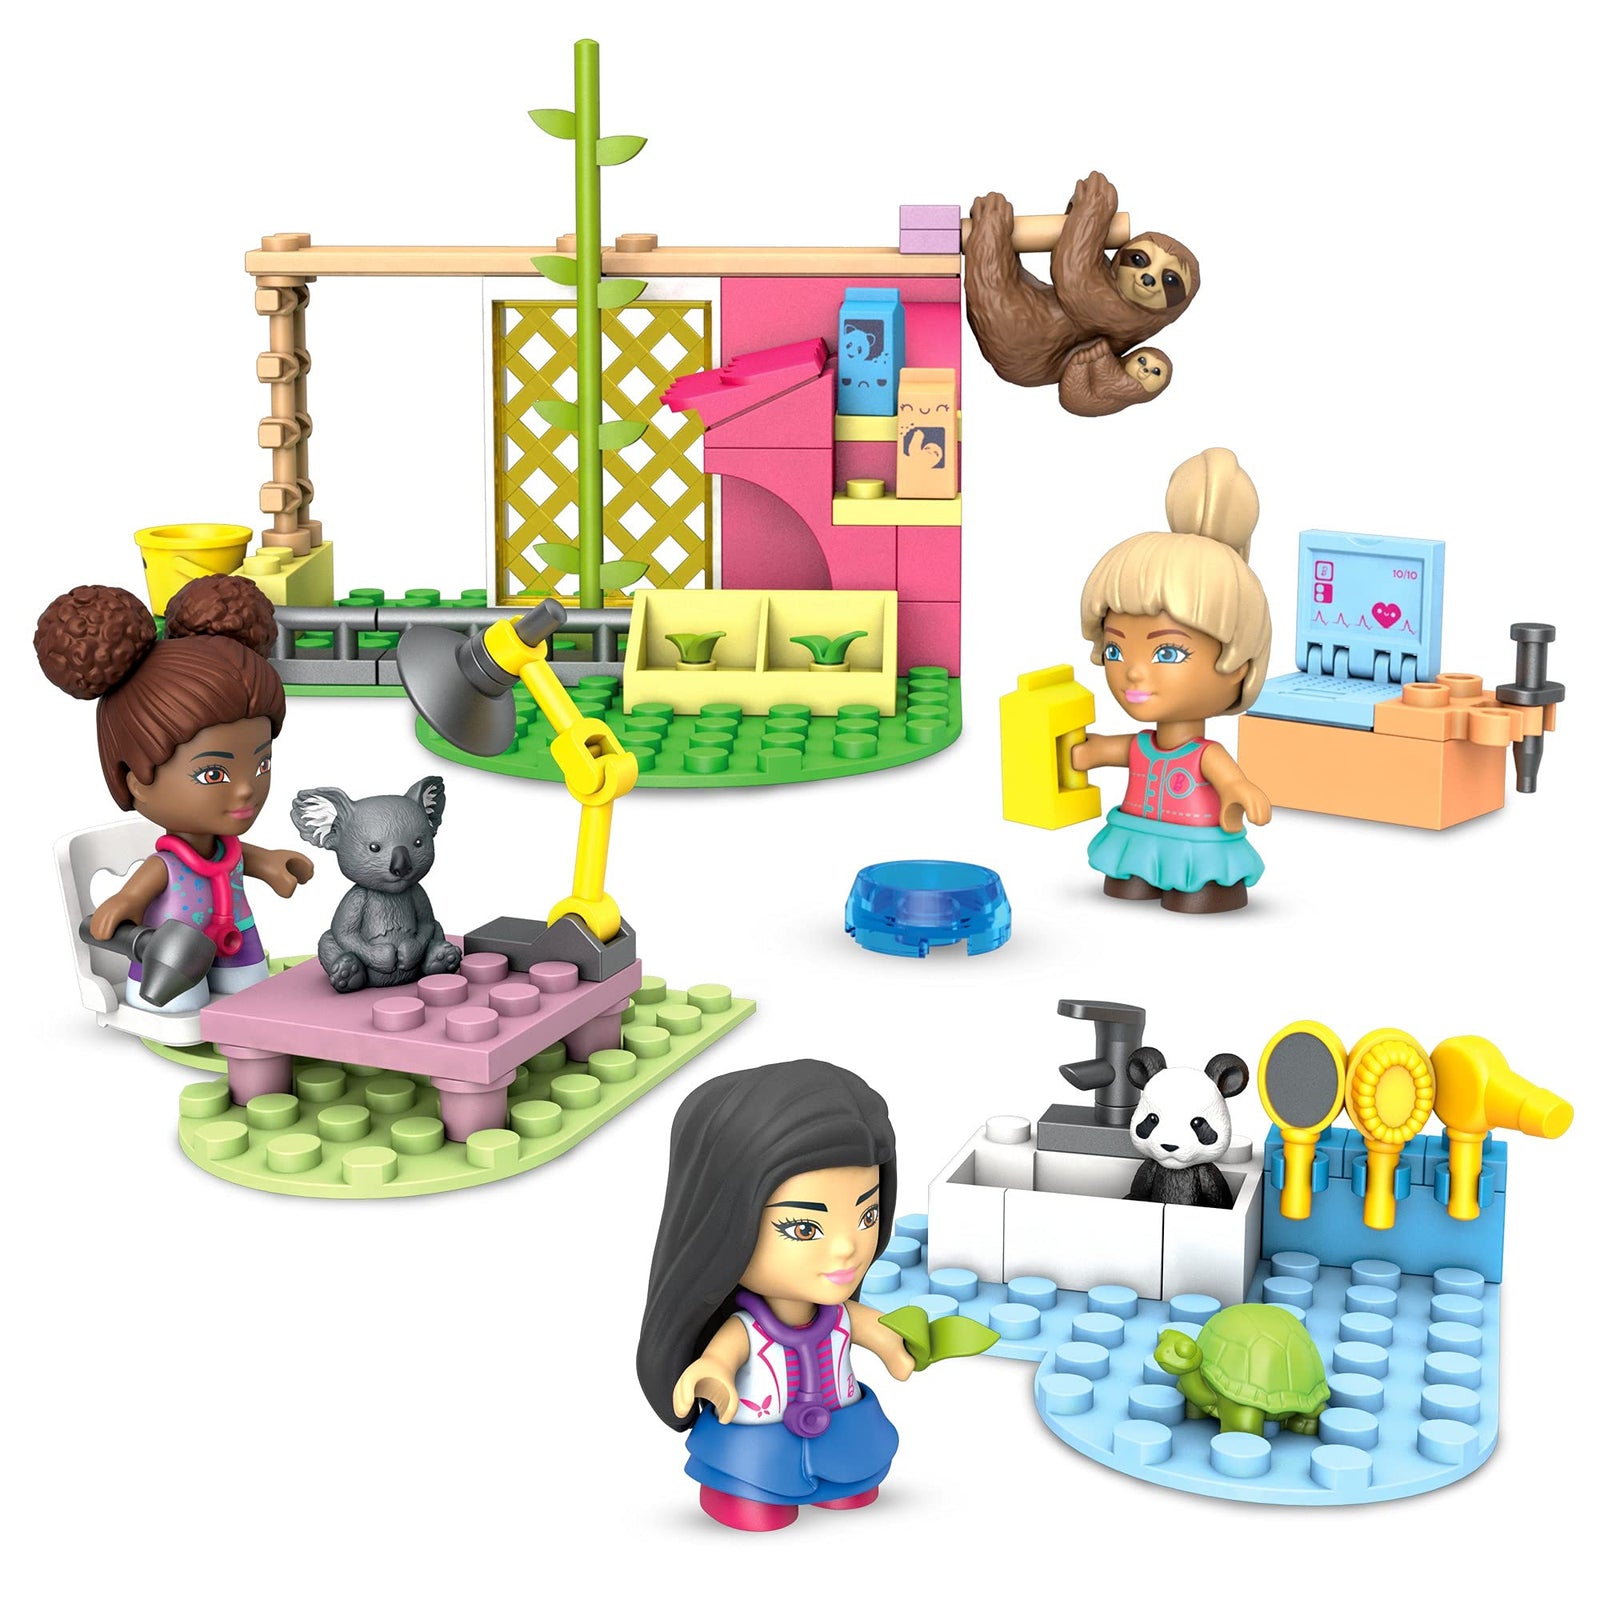 Mega Barbie Animal Grooming Station Building Set, 97 Bricks and Pieces with Fashion and Roleplay Accessories, 3 Micro-Dolls, 1 Panda, 1 Koala, 1 Turtle and 2 Sloths, Toy Gift Set for Ages 5 and up